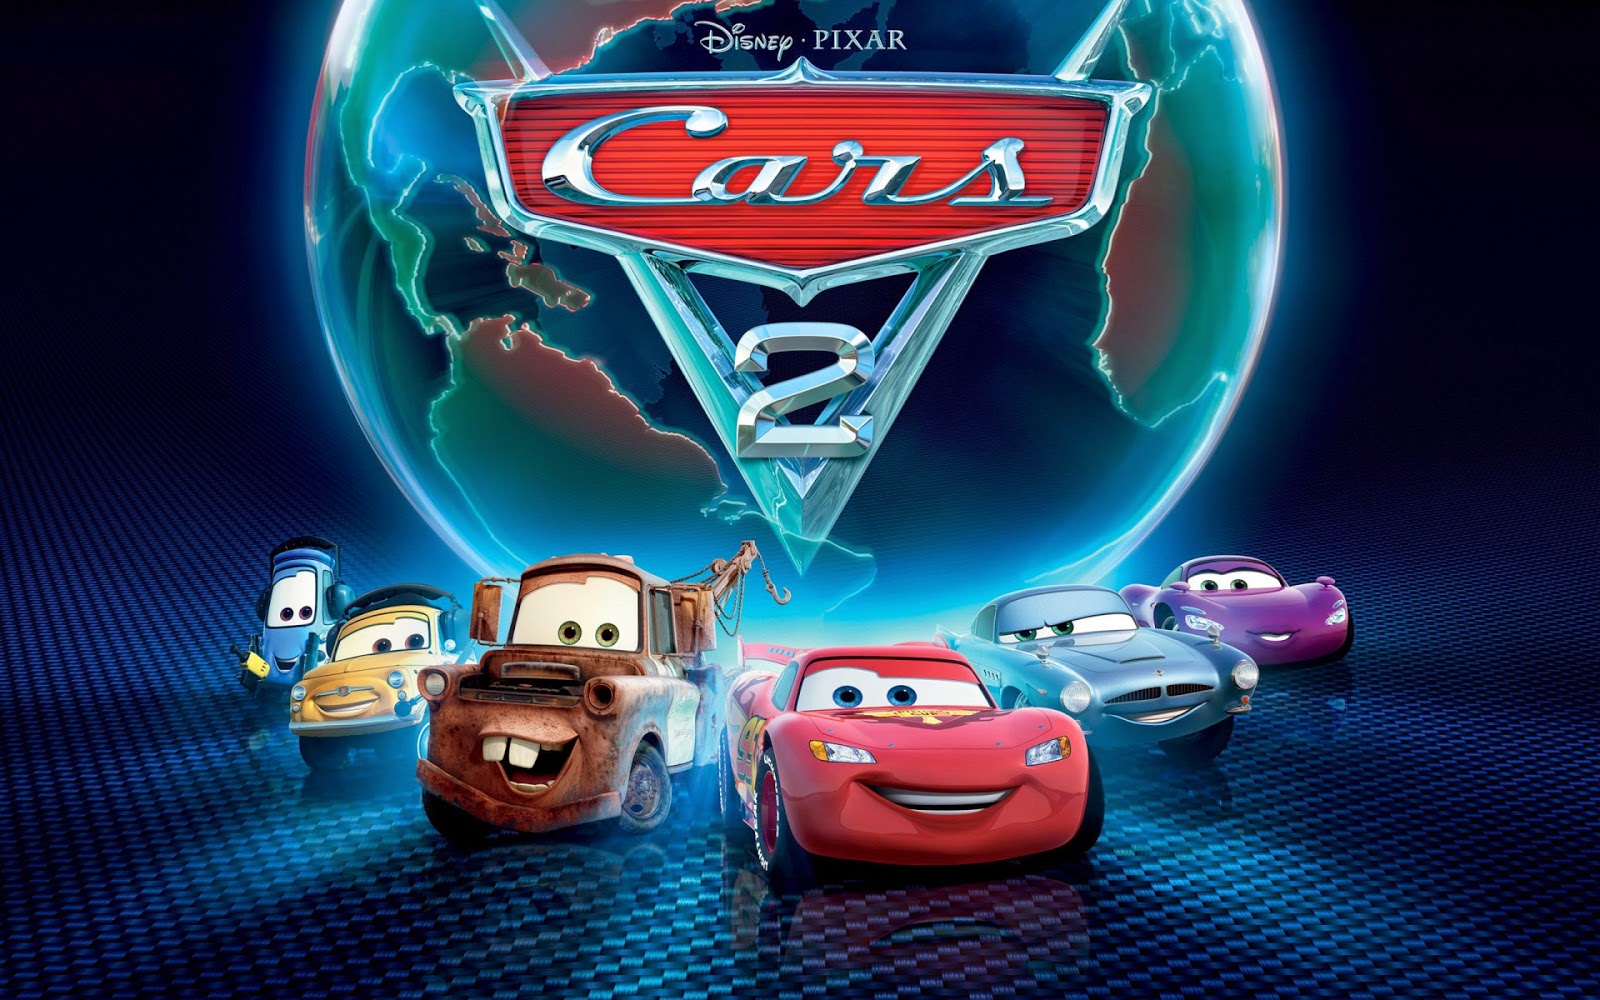 Watch Cars 2 In Hindi ~ Watch cartoons online, Watch anime online, Hindi dub anime ~ Toons Express